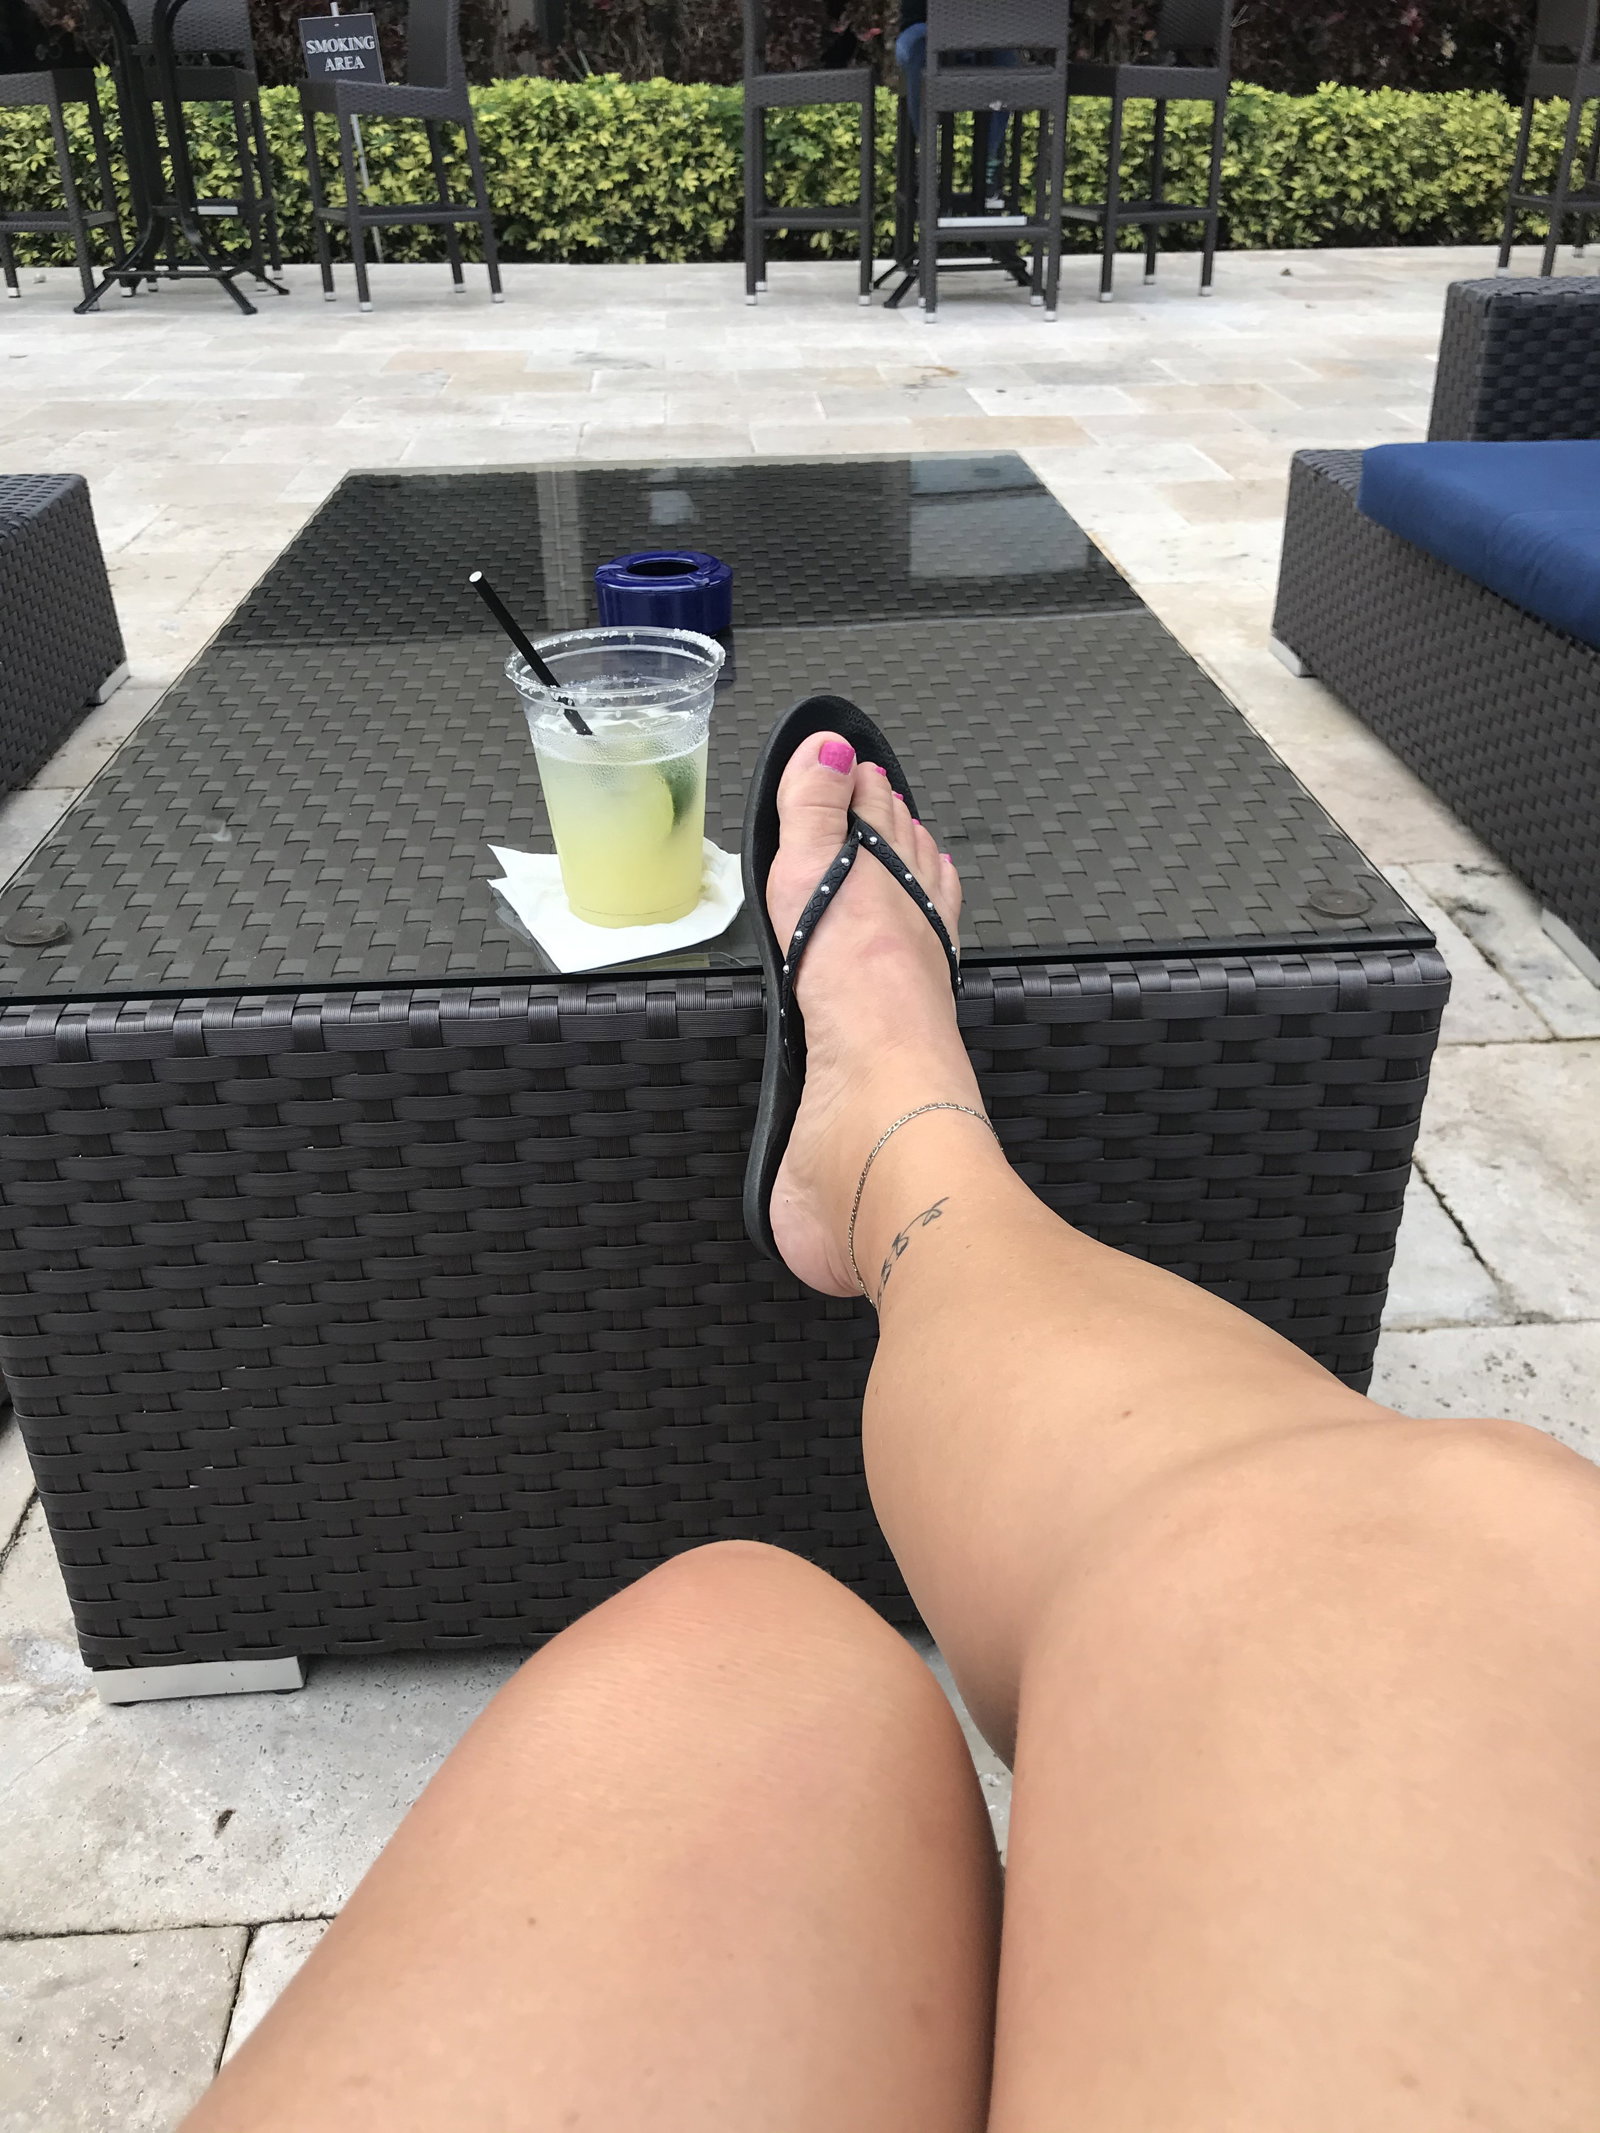 Photo by Couple4fun66 with the username @Couple4fun66,  March 6, 2020 at 10:05 PM. The post is about the topic real wifes and the text says 'Wife in Miami waiting to board a cruise ship for 7 days of fun. Girls trip. She is on the prowl hoping to find some action'